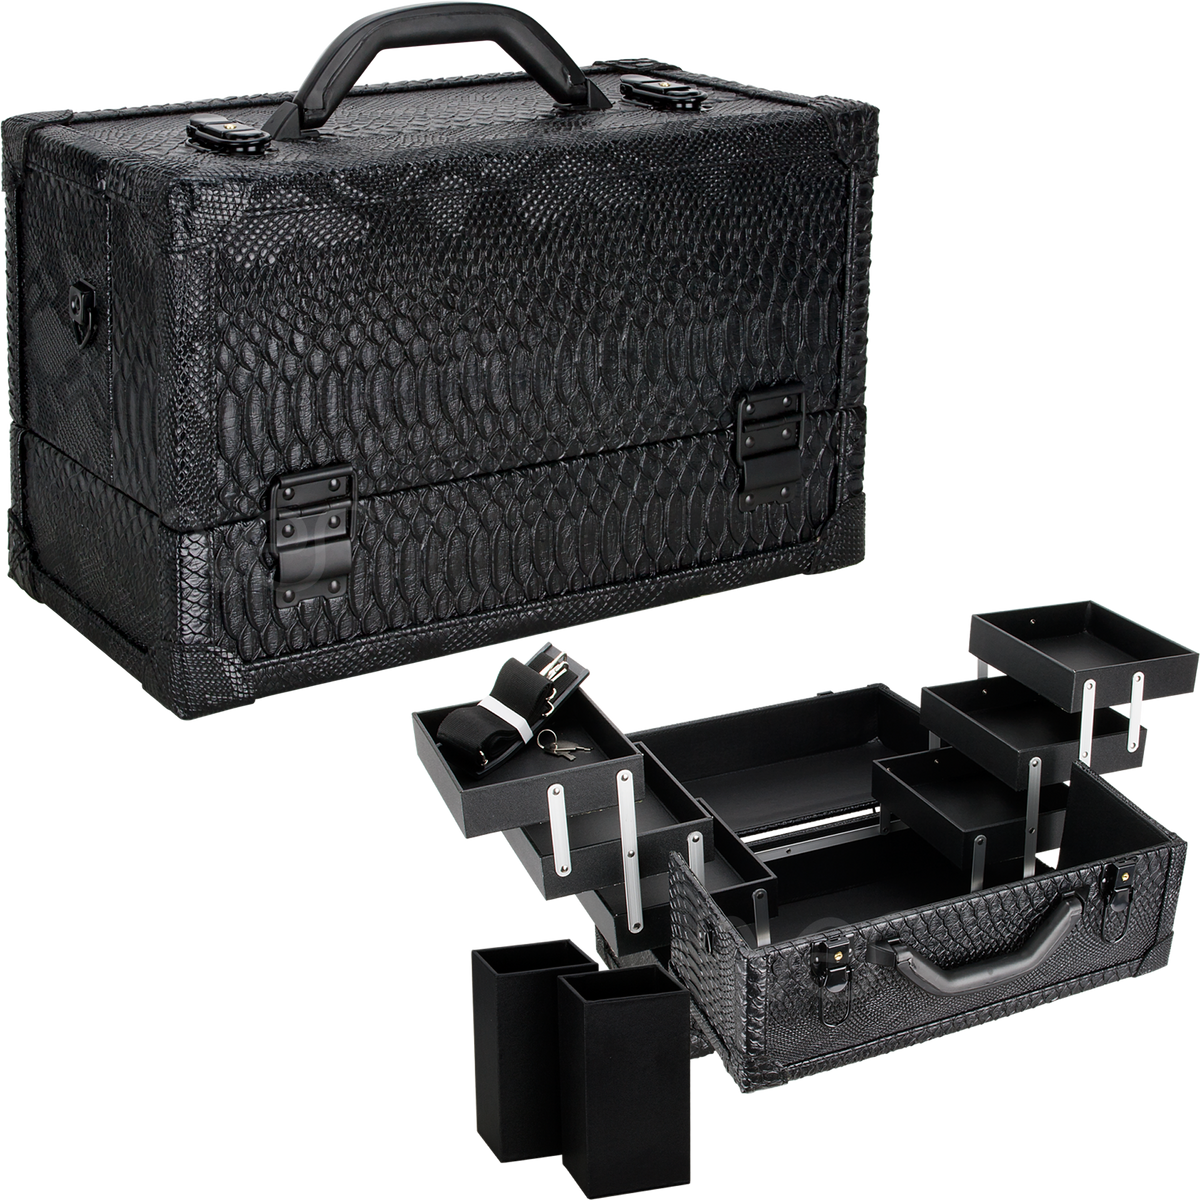 RUCELLA TRAIN MAKEUP CASE BY VER BEAUTY-VK3201